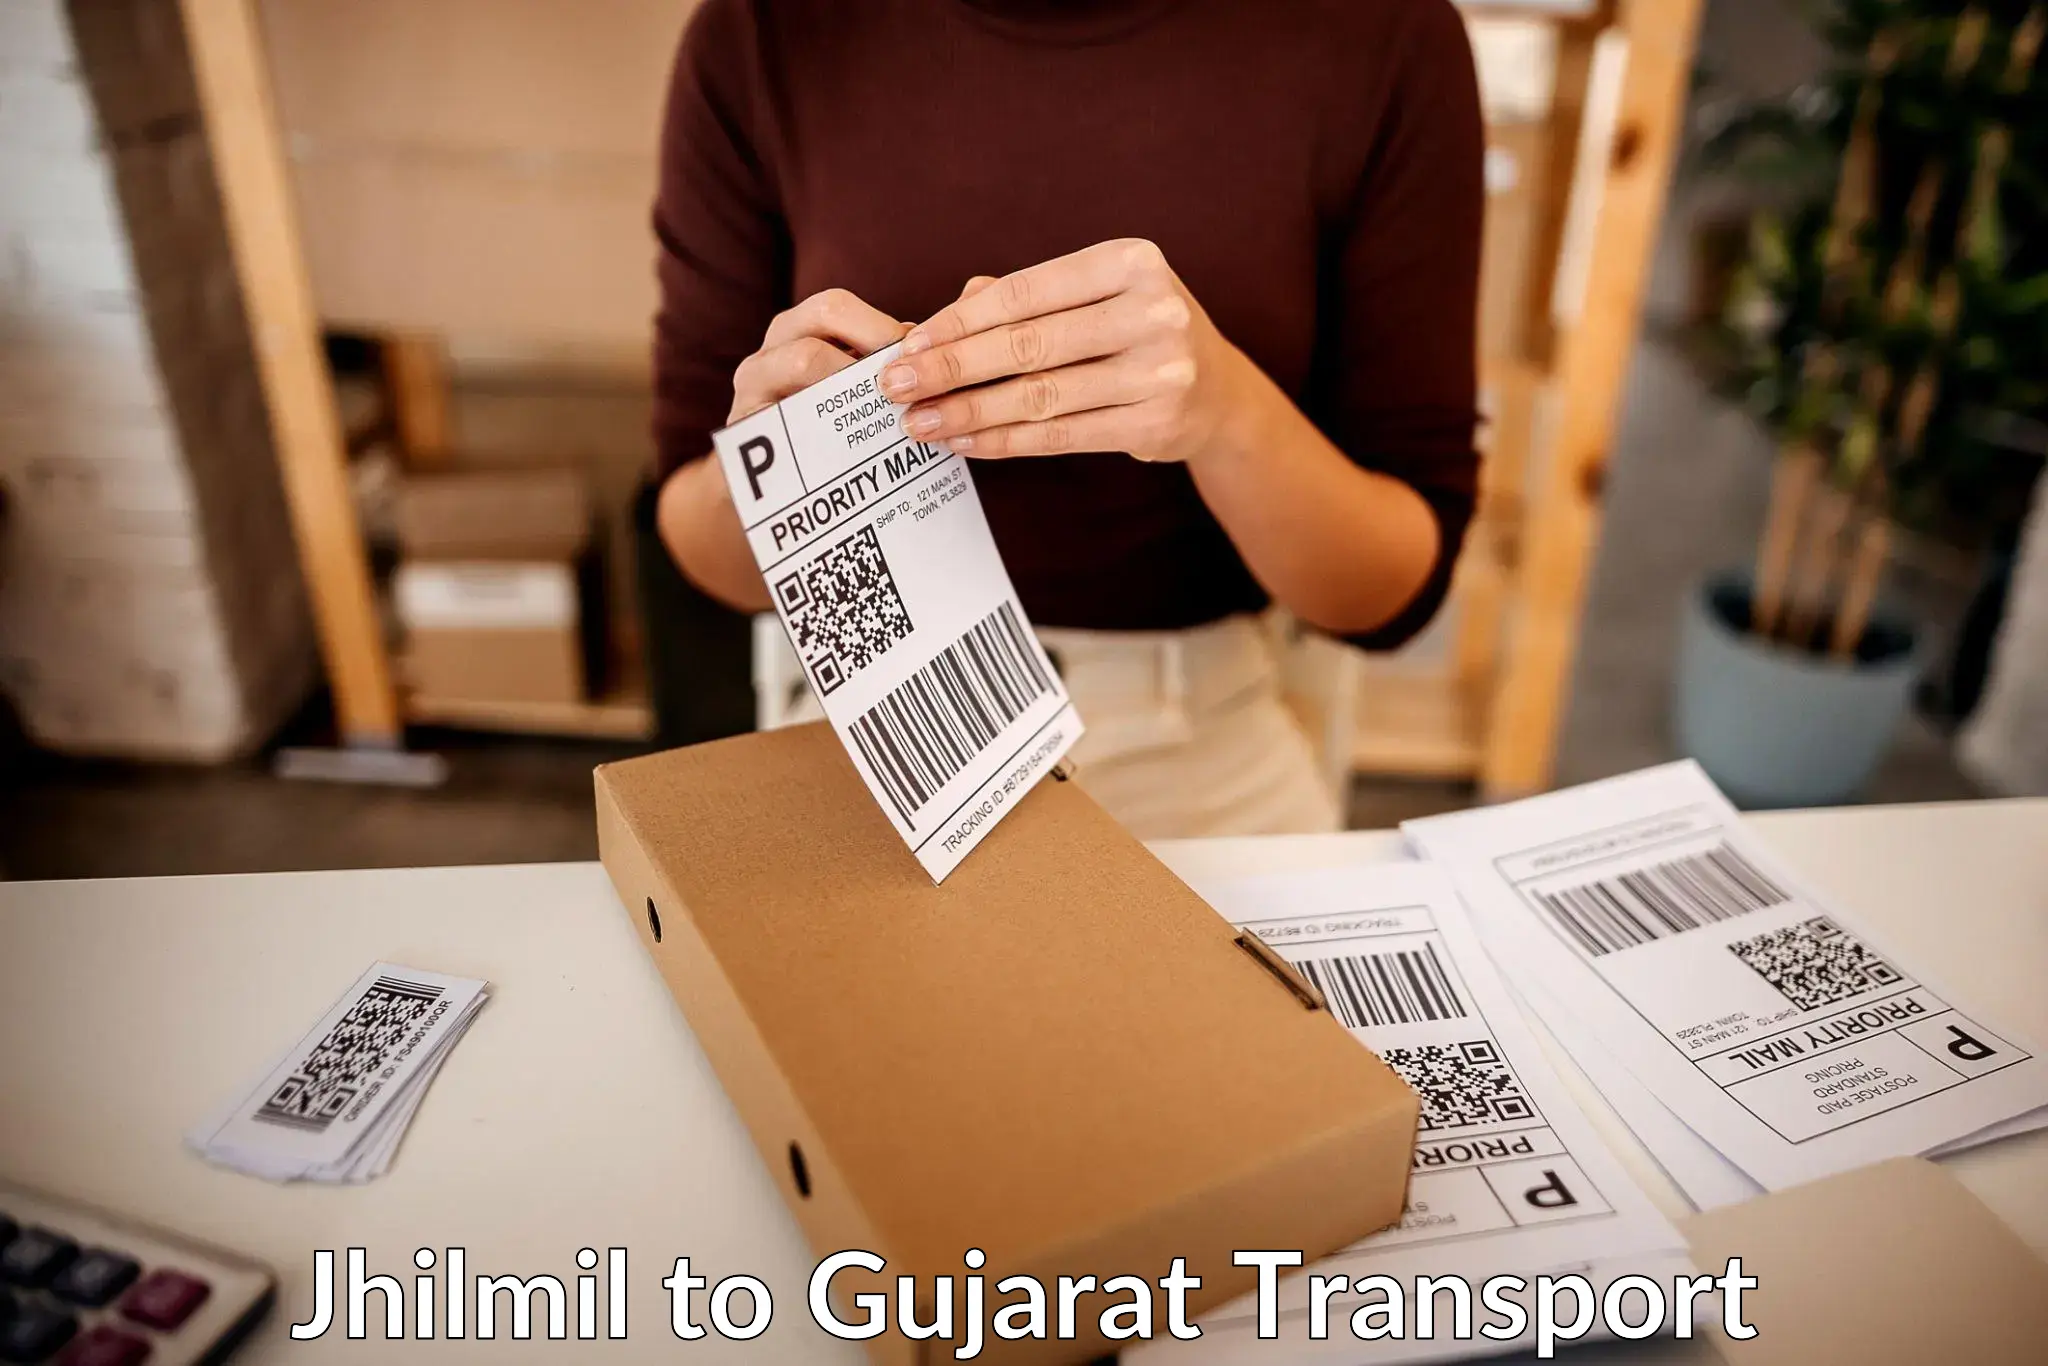 Air cargo transport services Jhilmil to GIDC